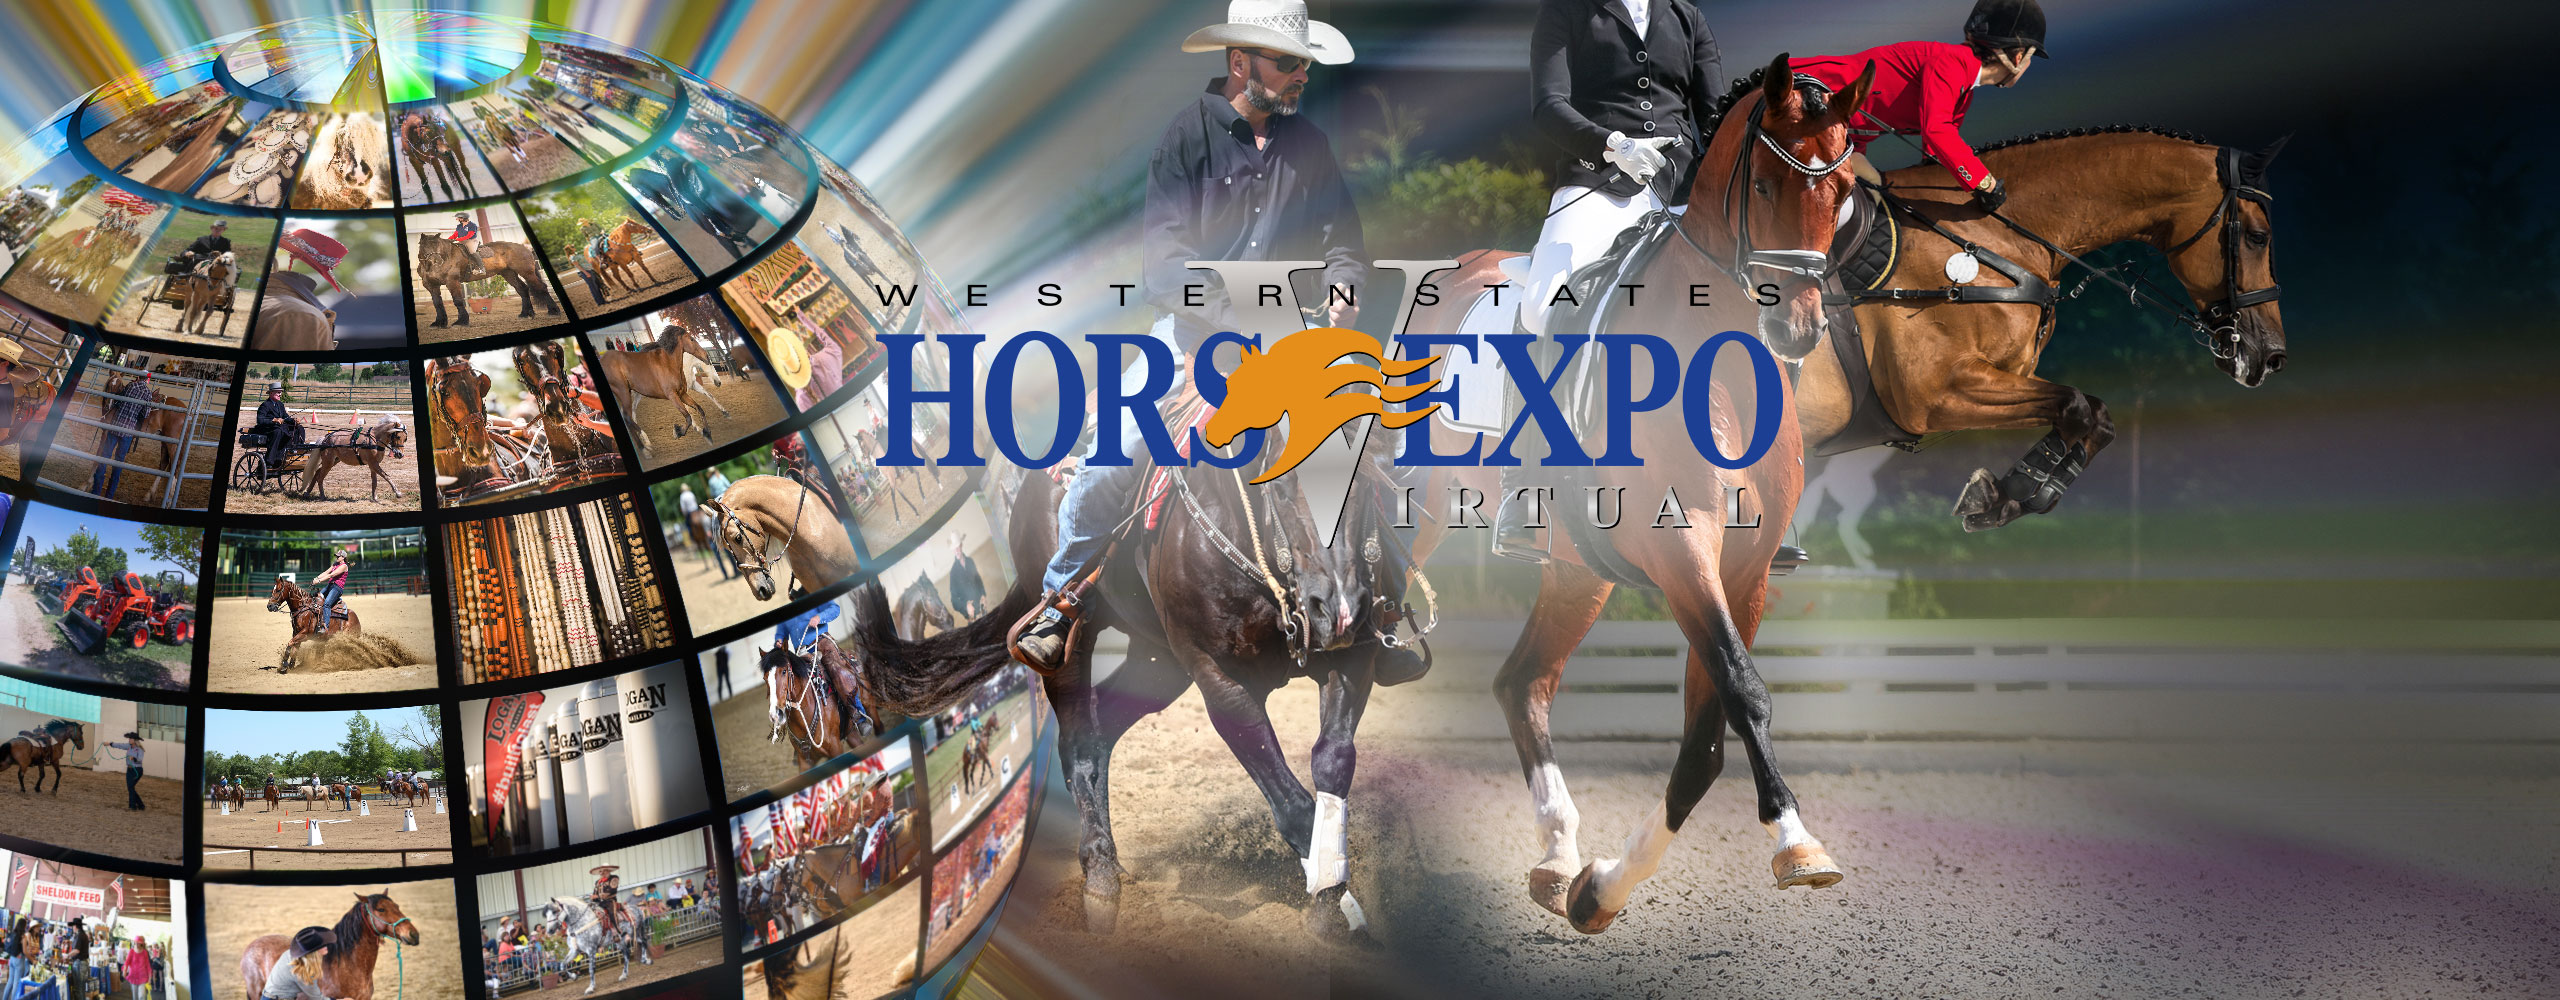 Western States Virtual Horse Expo Western States Virtual Horse Expo